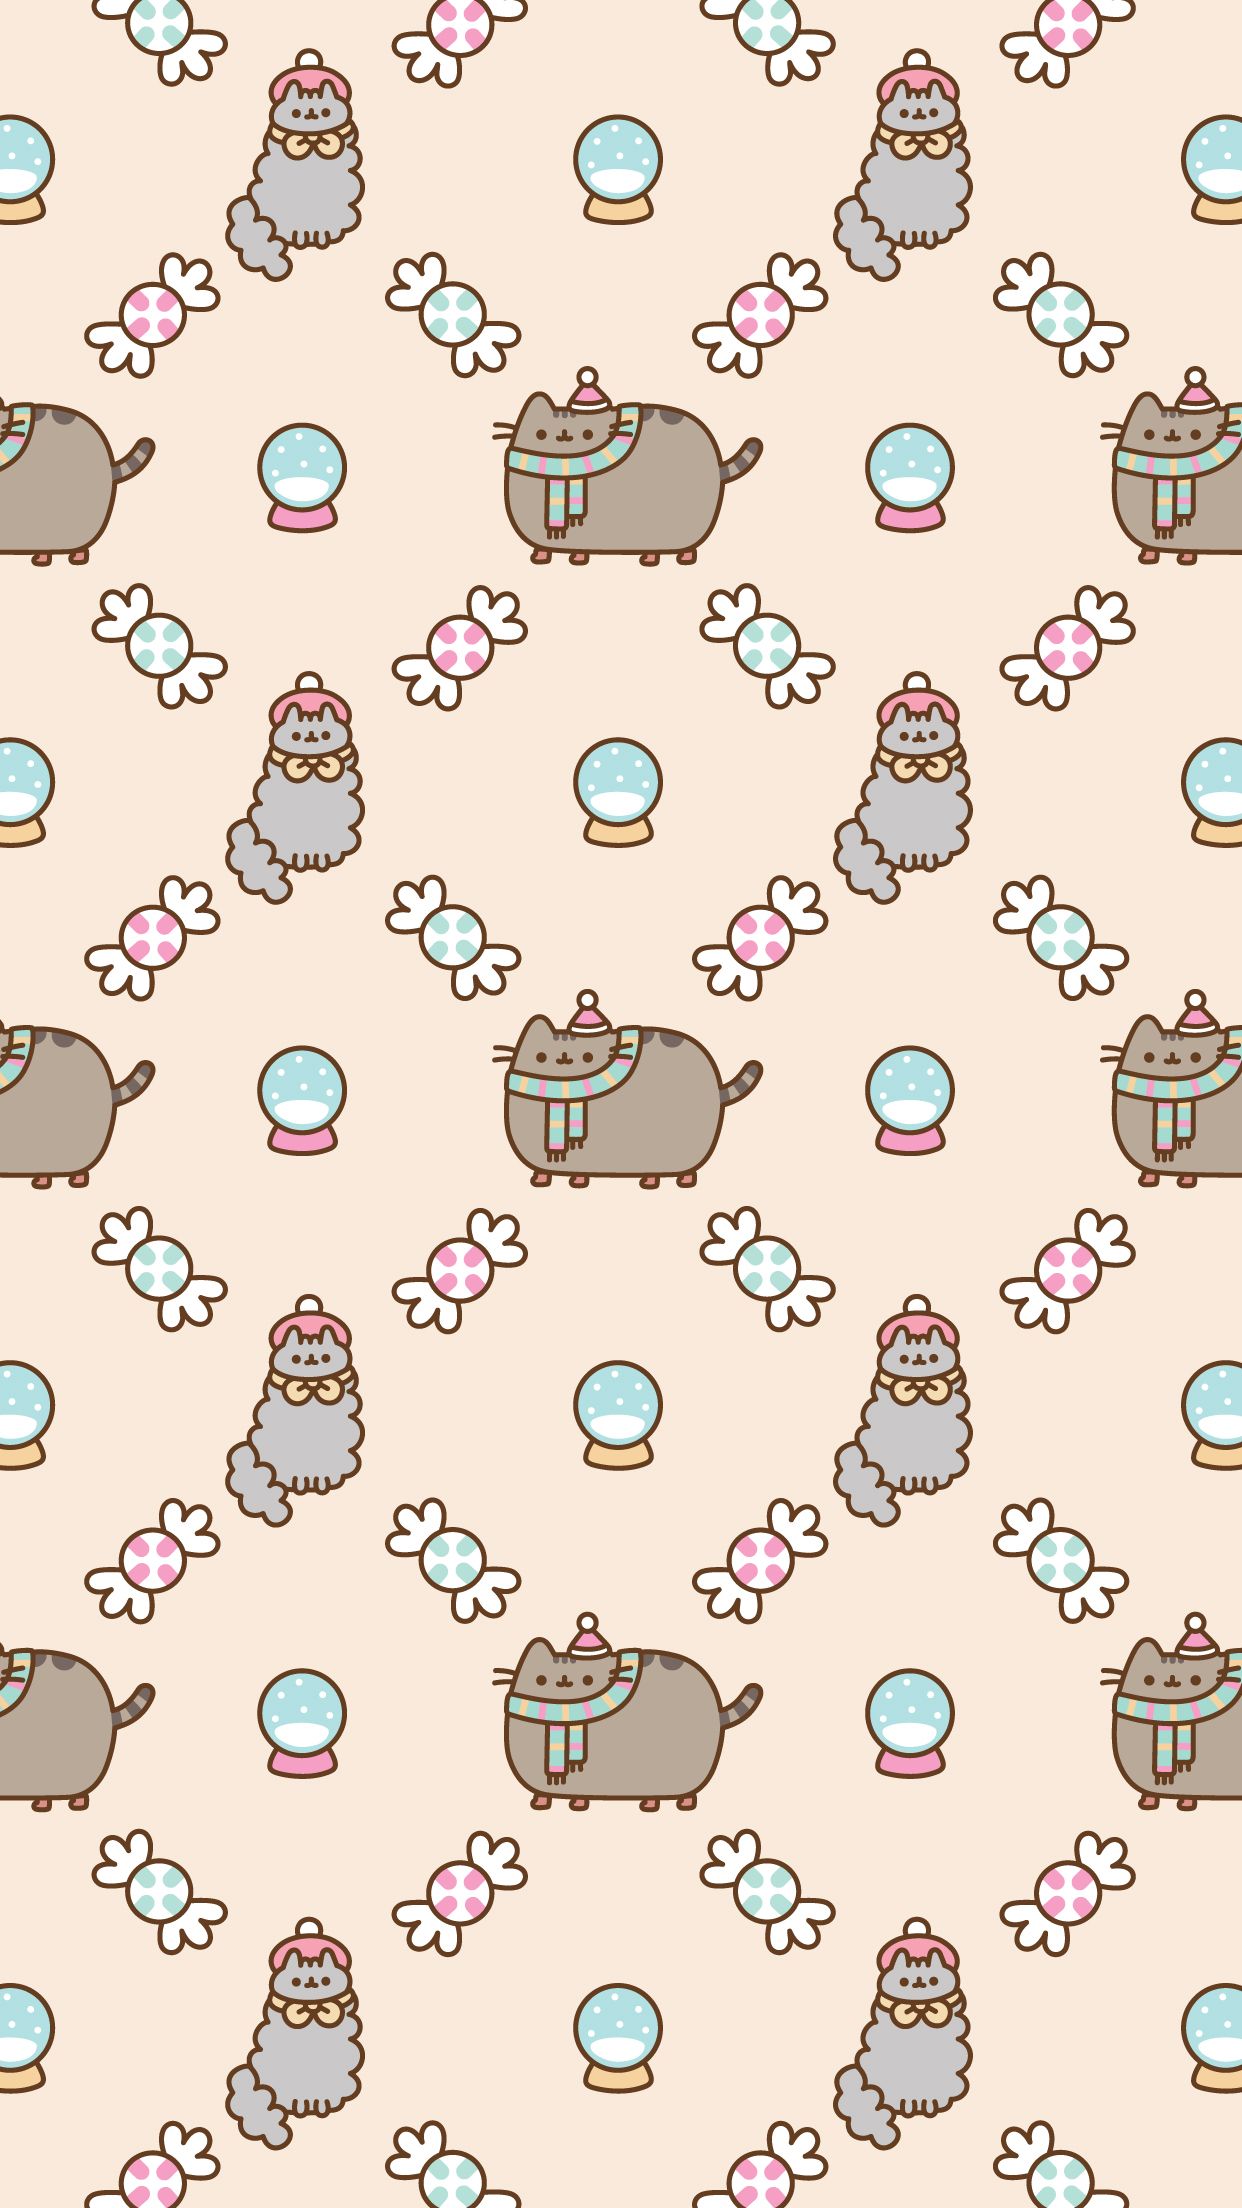 Free Christmas Pusheen Android and iPhone® Wallpaper - #ClairesBlog